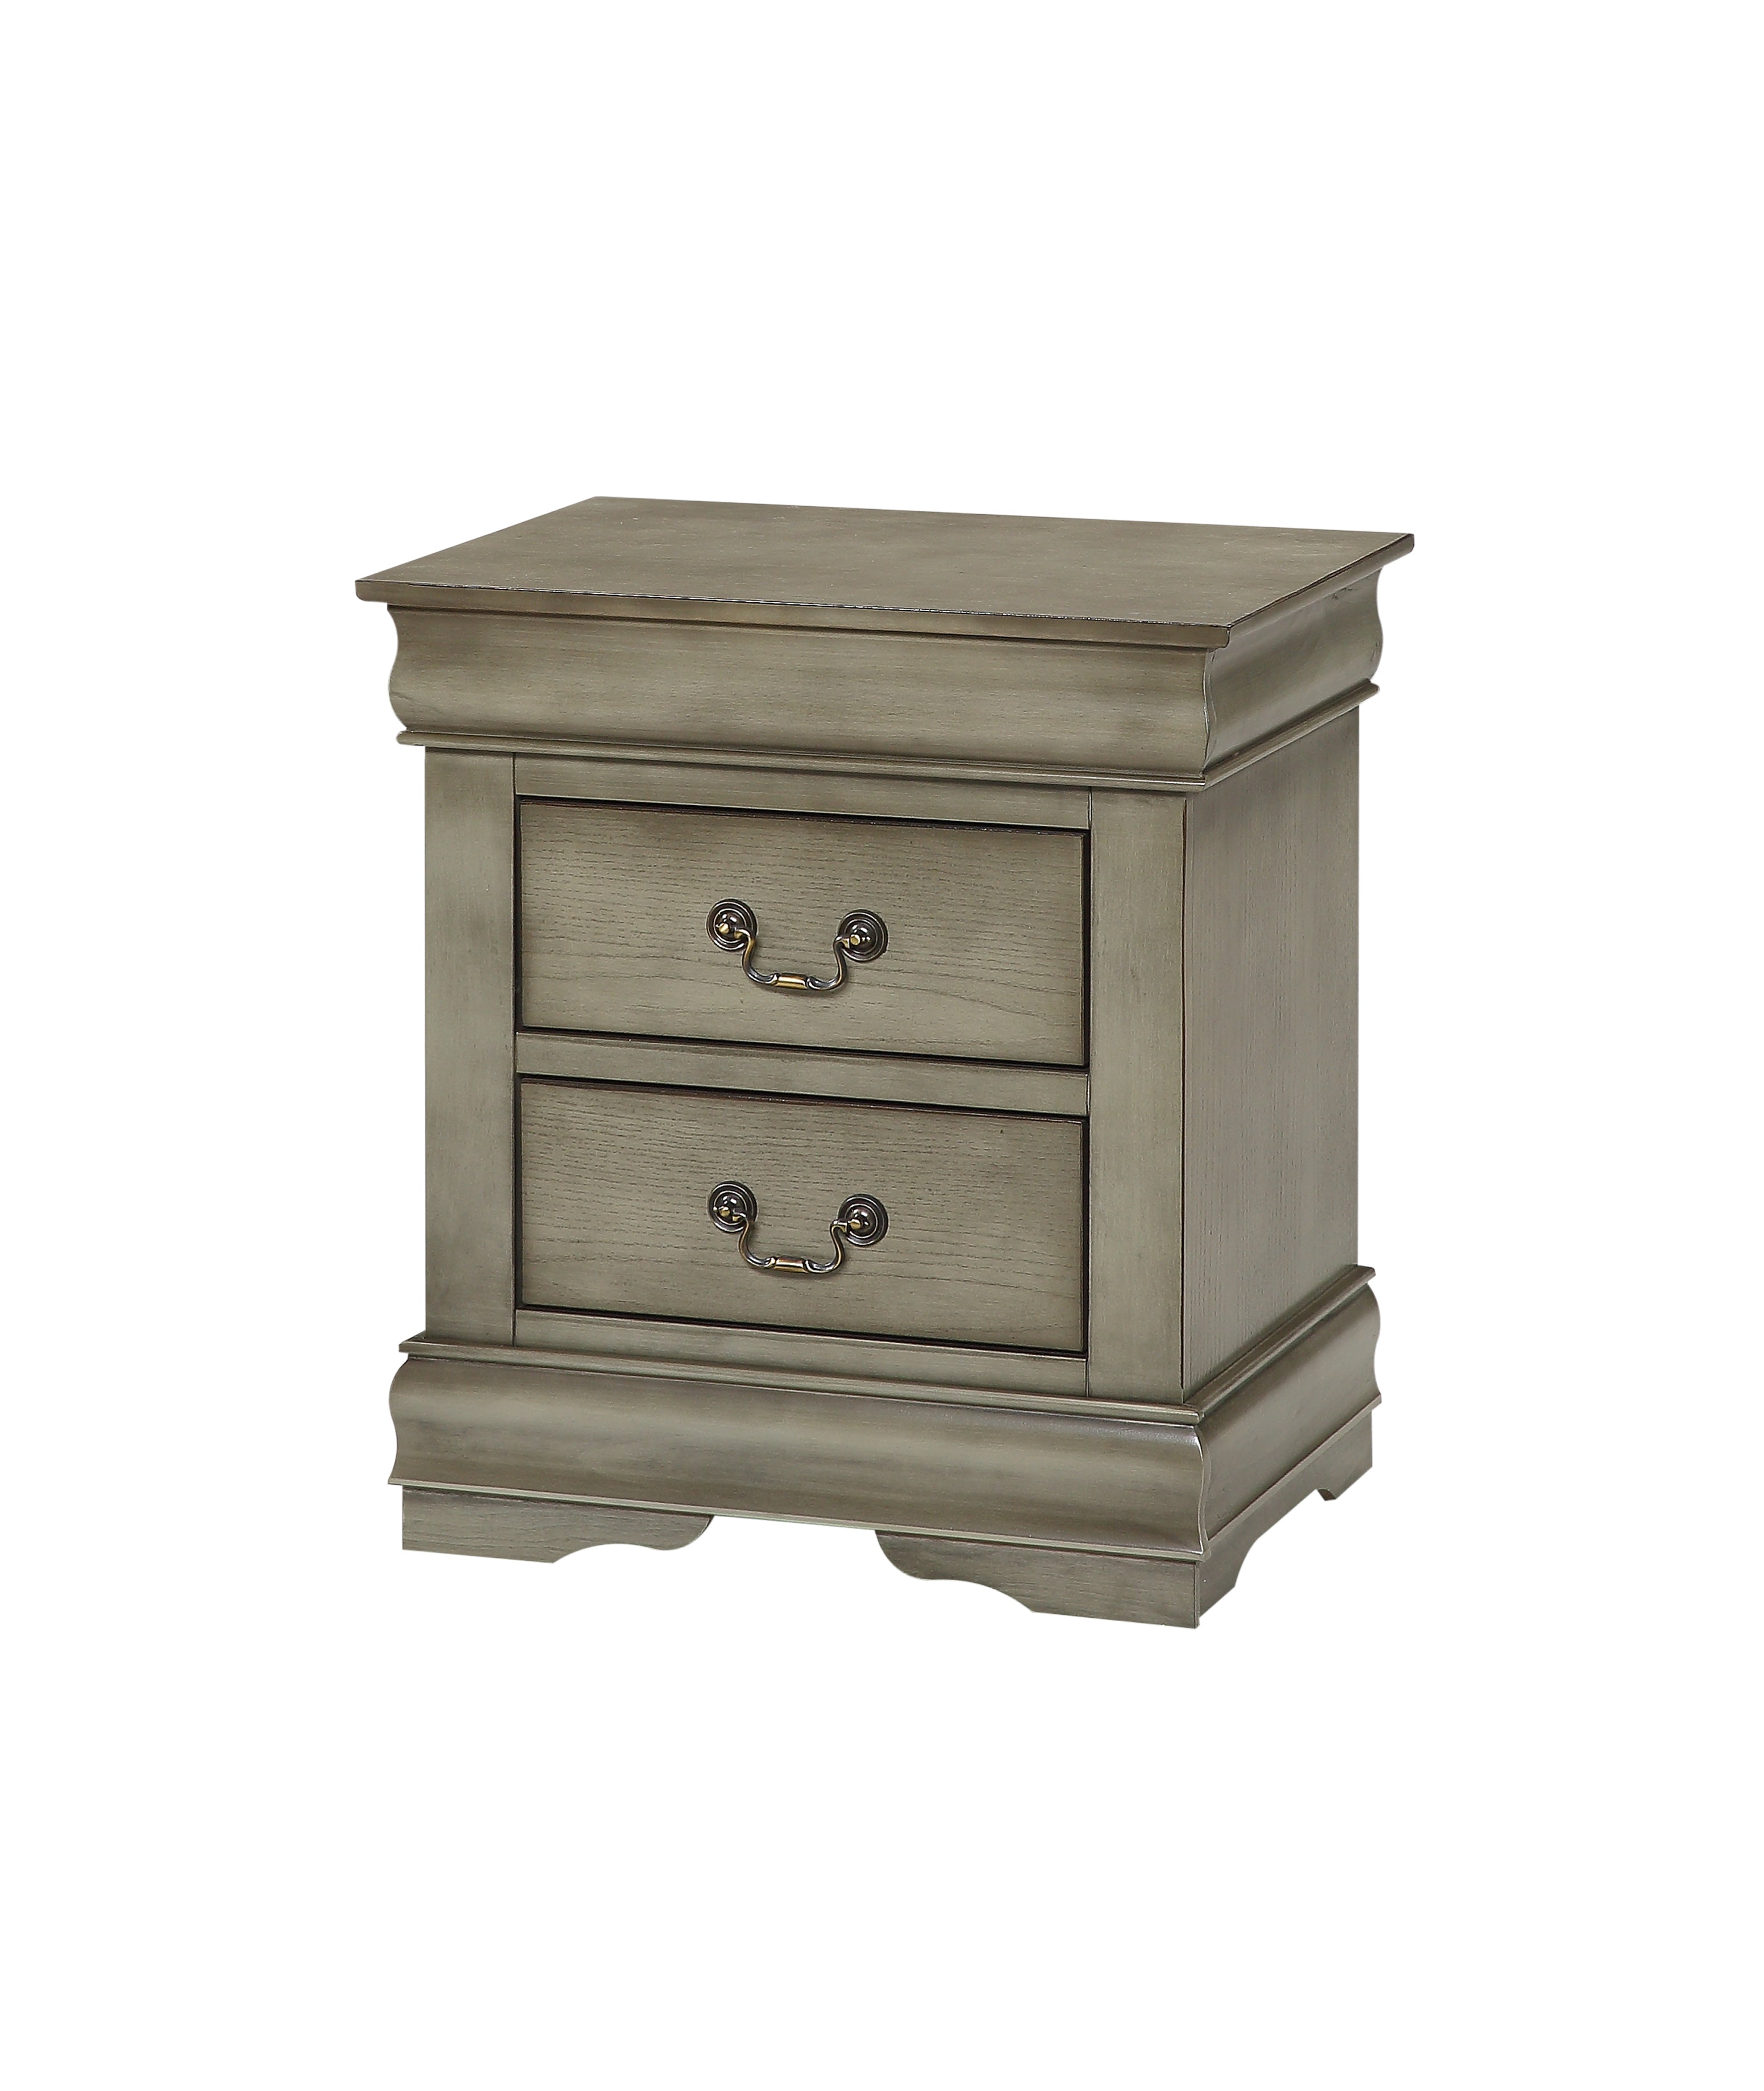 Louis Philippe Nightstand with Drawers in your choice of wood and